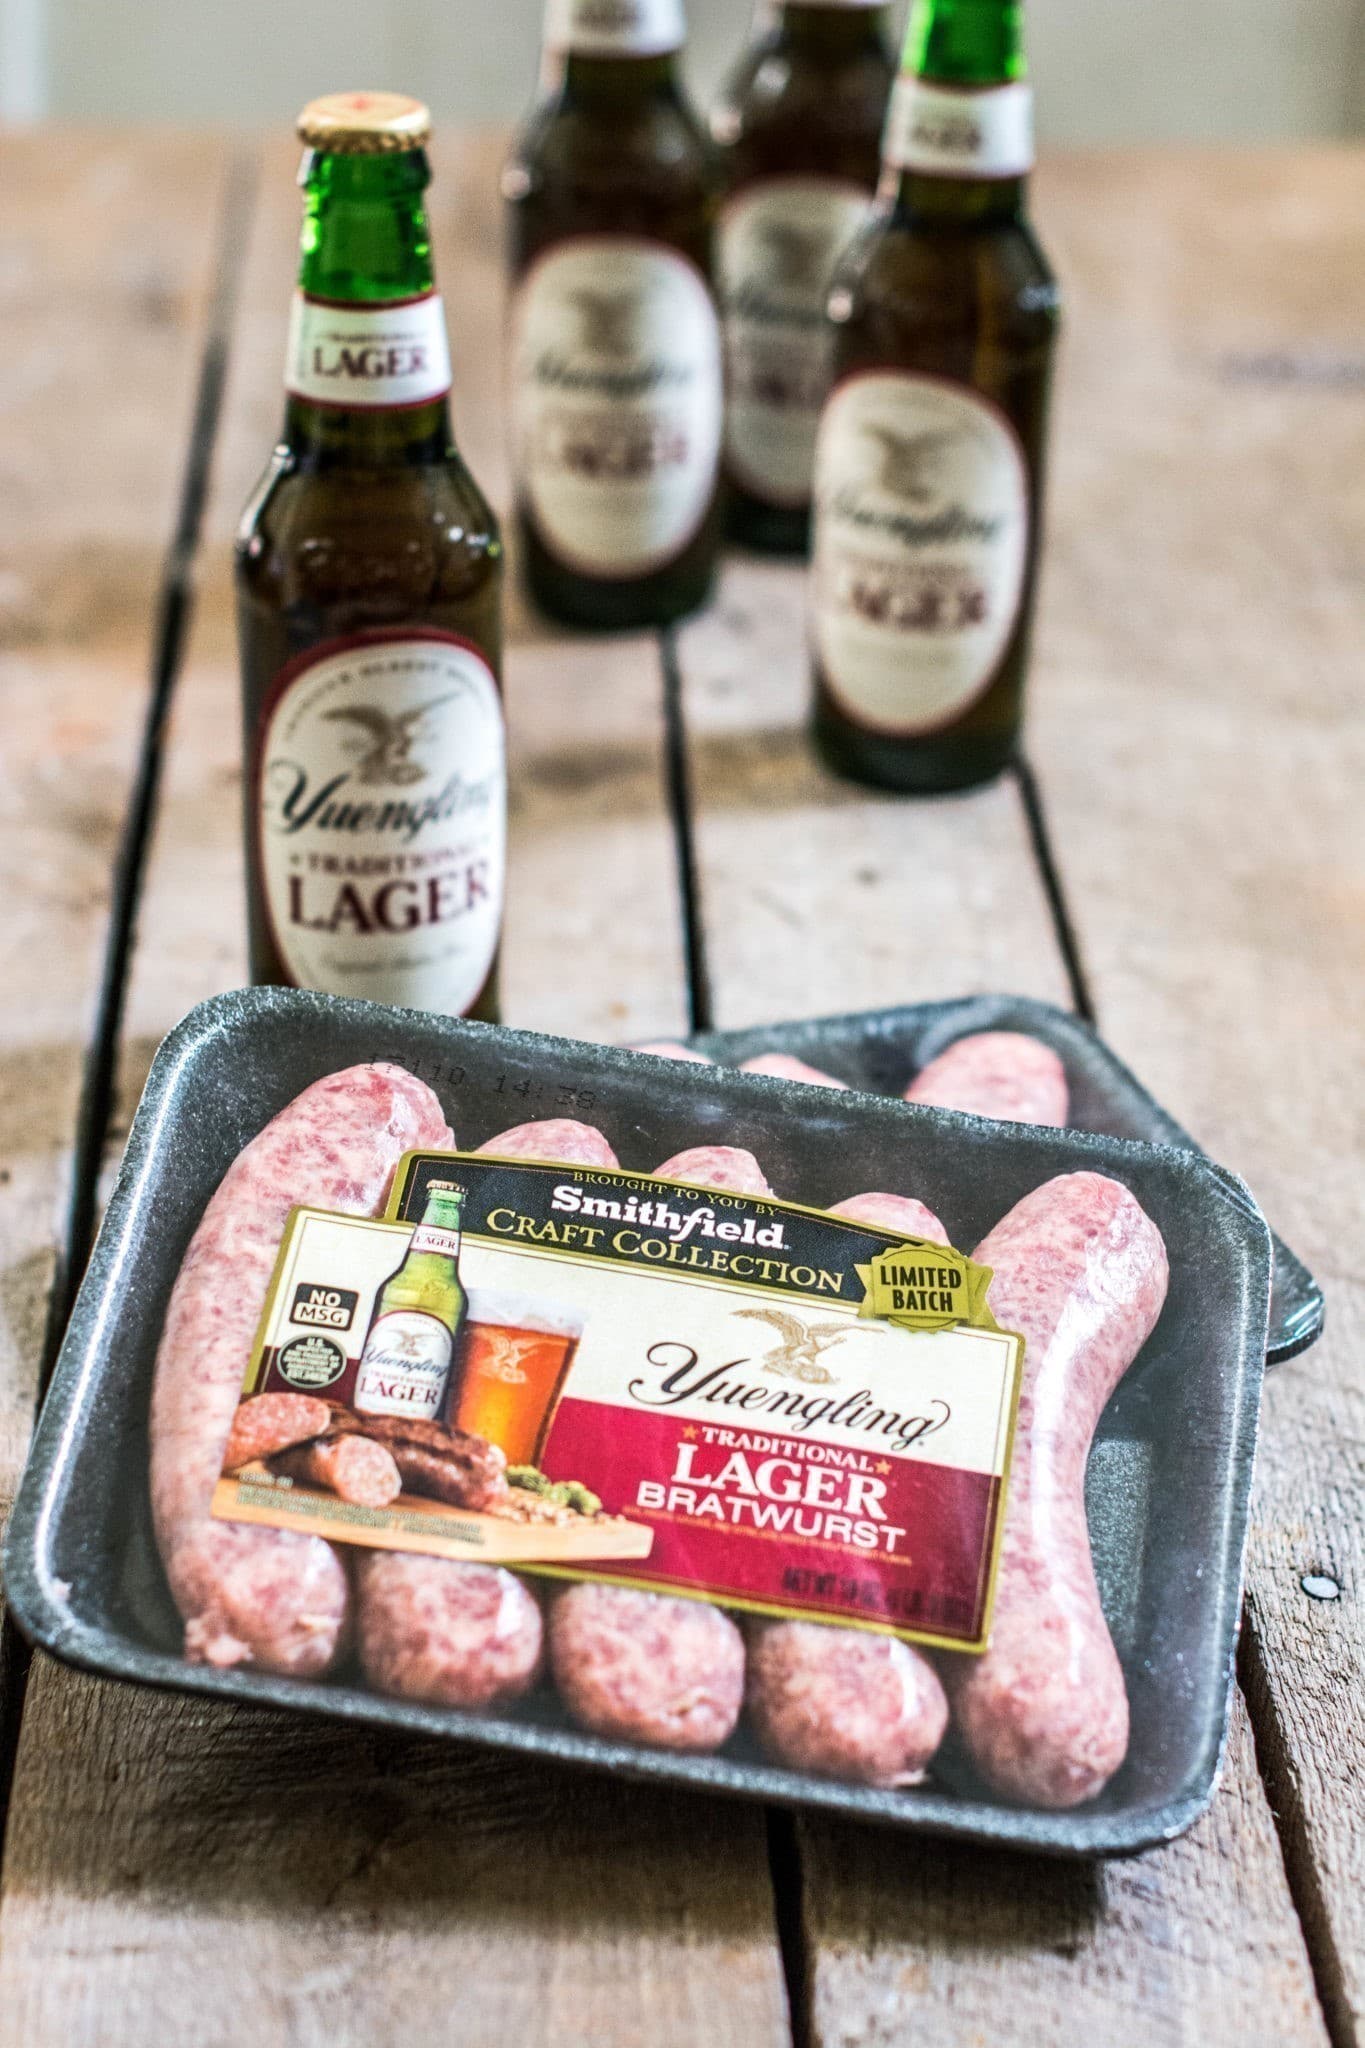 Smithfield® Yuengling® Bratwurst are perfect for your summertime fun! Read more at Little Figgy Food about #BeerBrats with @SmithfieldBrand and @Yuengling_Beer. #ad